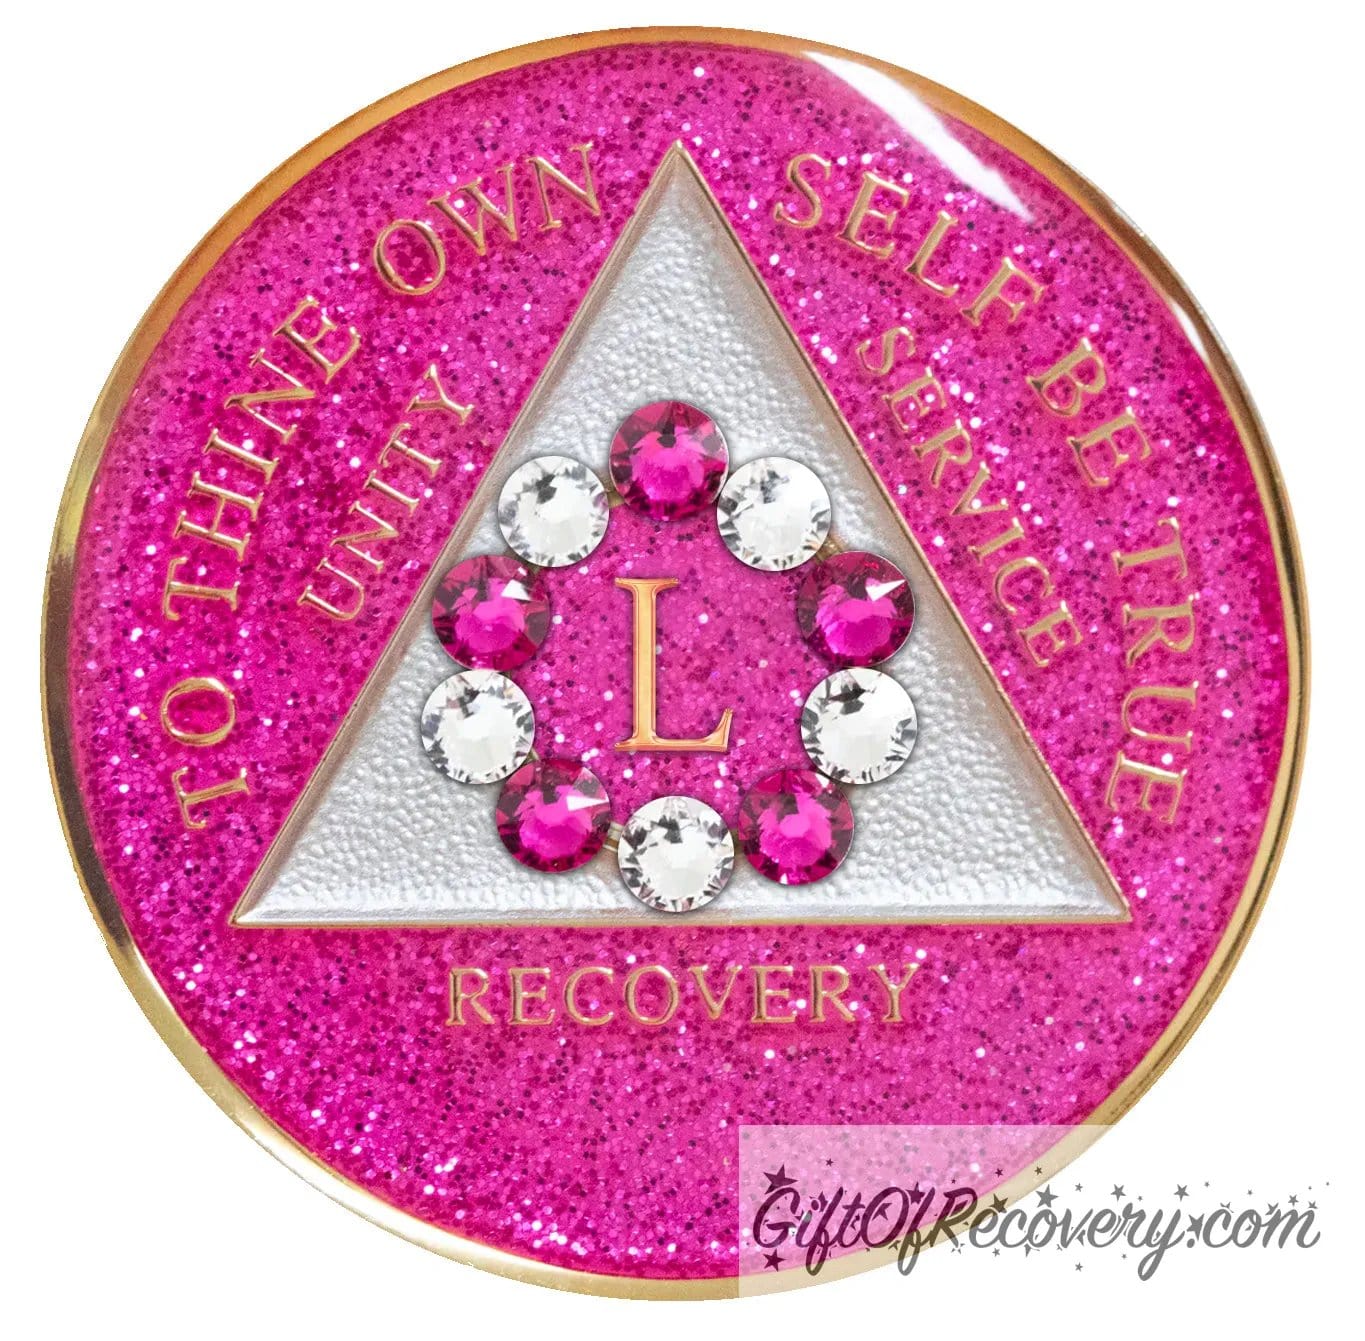 50 Year princess pink glitter 10th step AA medallion with 5 pink genuine crystals and 5 clear genuine crystal, formed in a circle around the year, to thine own self be true, triangle in the center and unity, service, recovery, along with rim of medallion are slightly raised in 14k gold, the center of the triangle is pearl white with the circle being pink glitter, all emphasizing action and reflection, for your favorite sober princess.